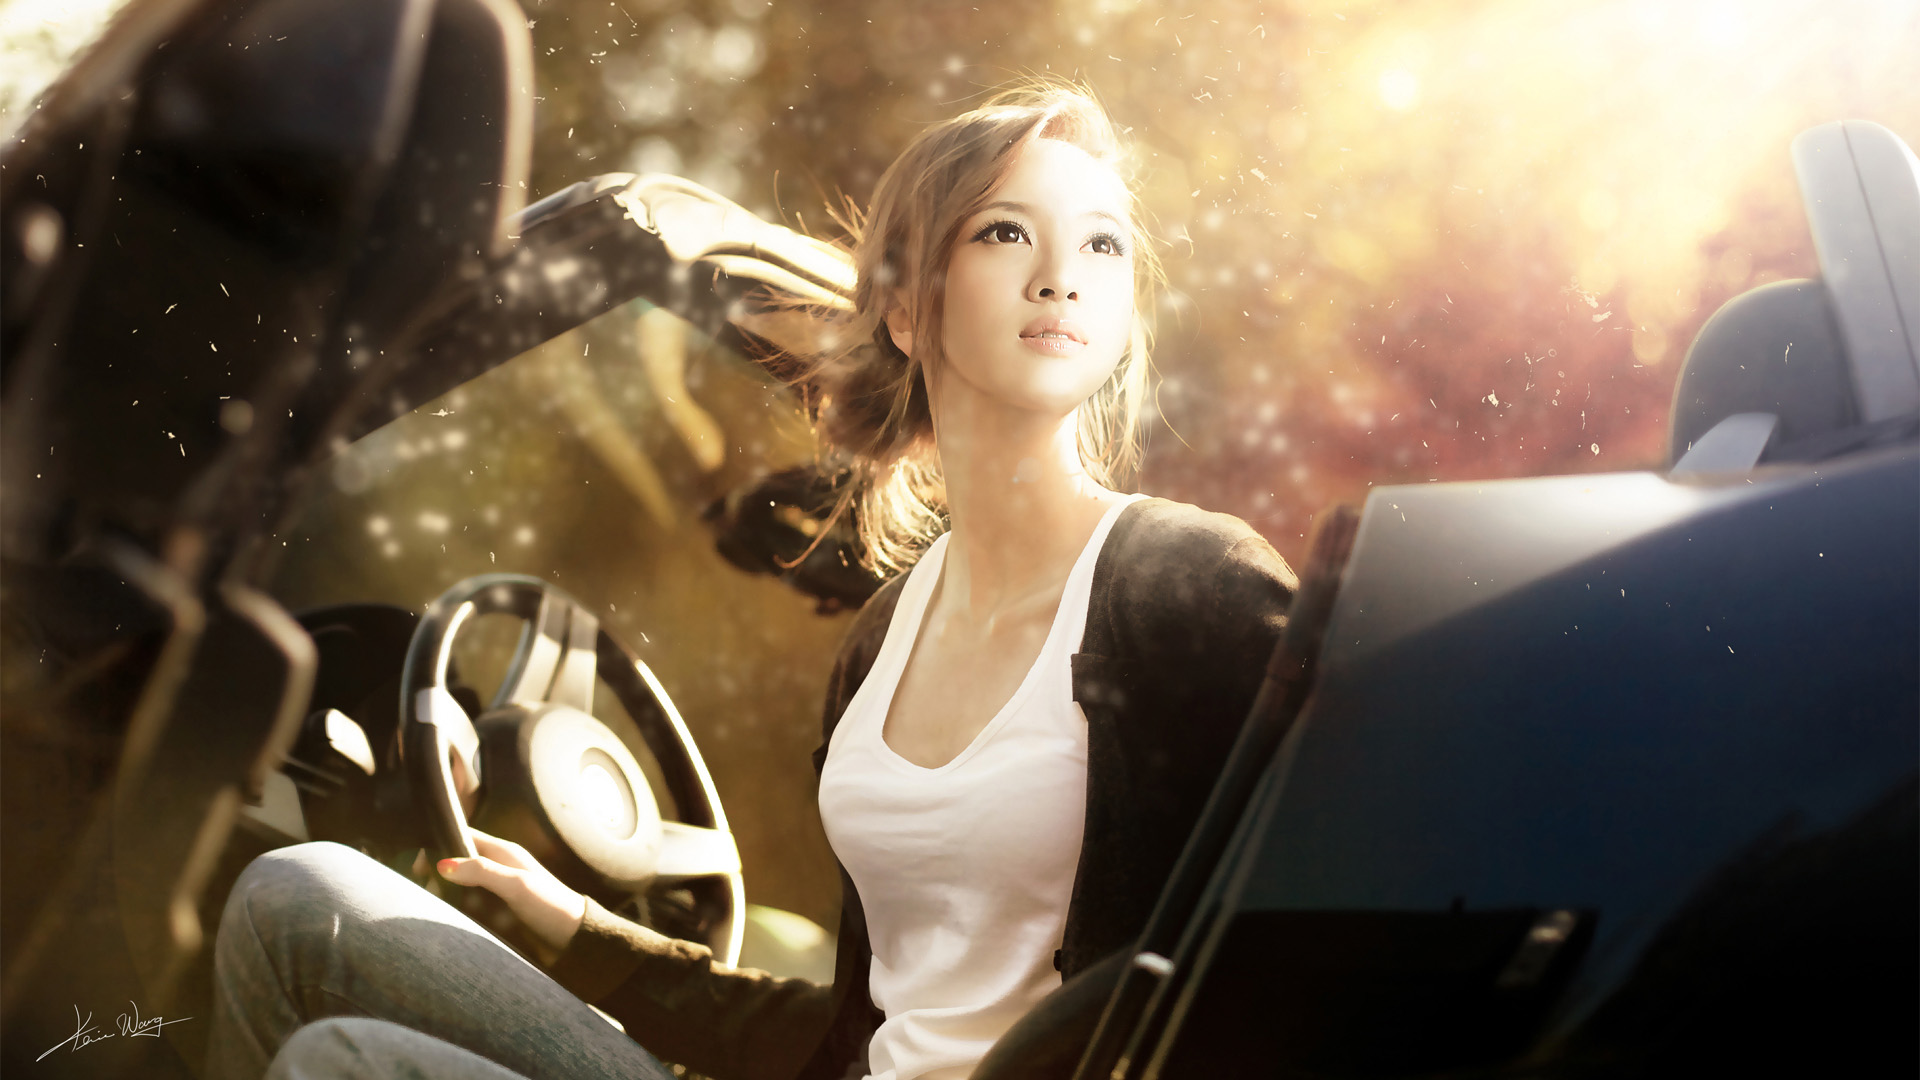 People 1920x1080 women Asian photography model brunette long hair sepia dirt effects women with cars tank top